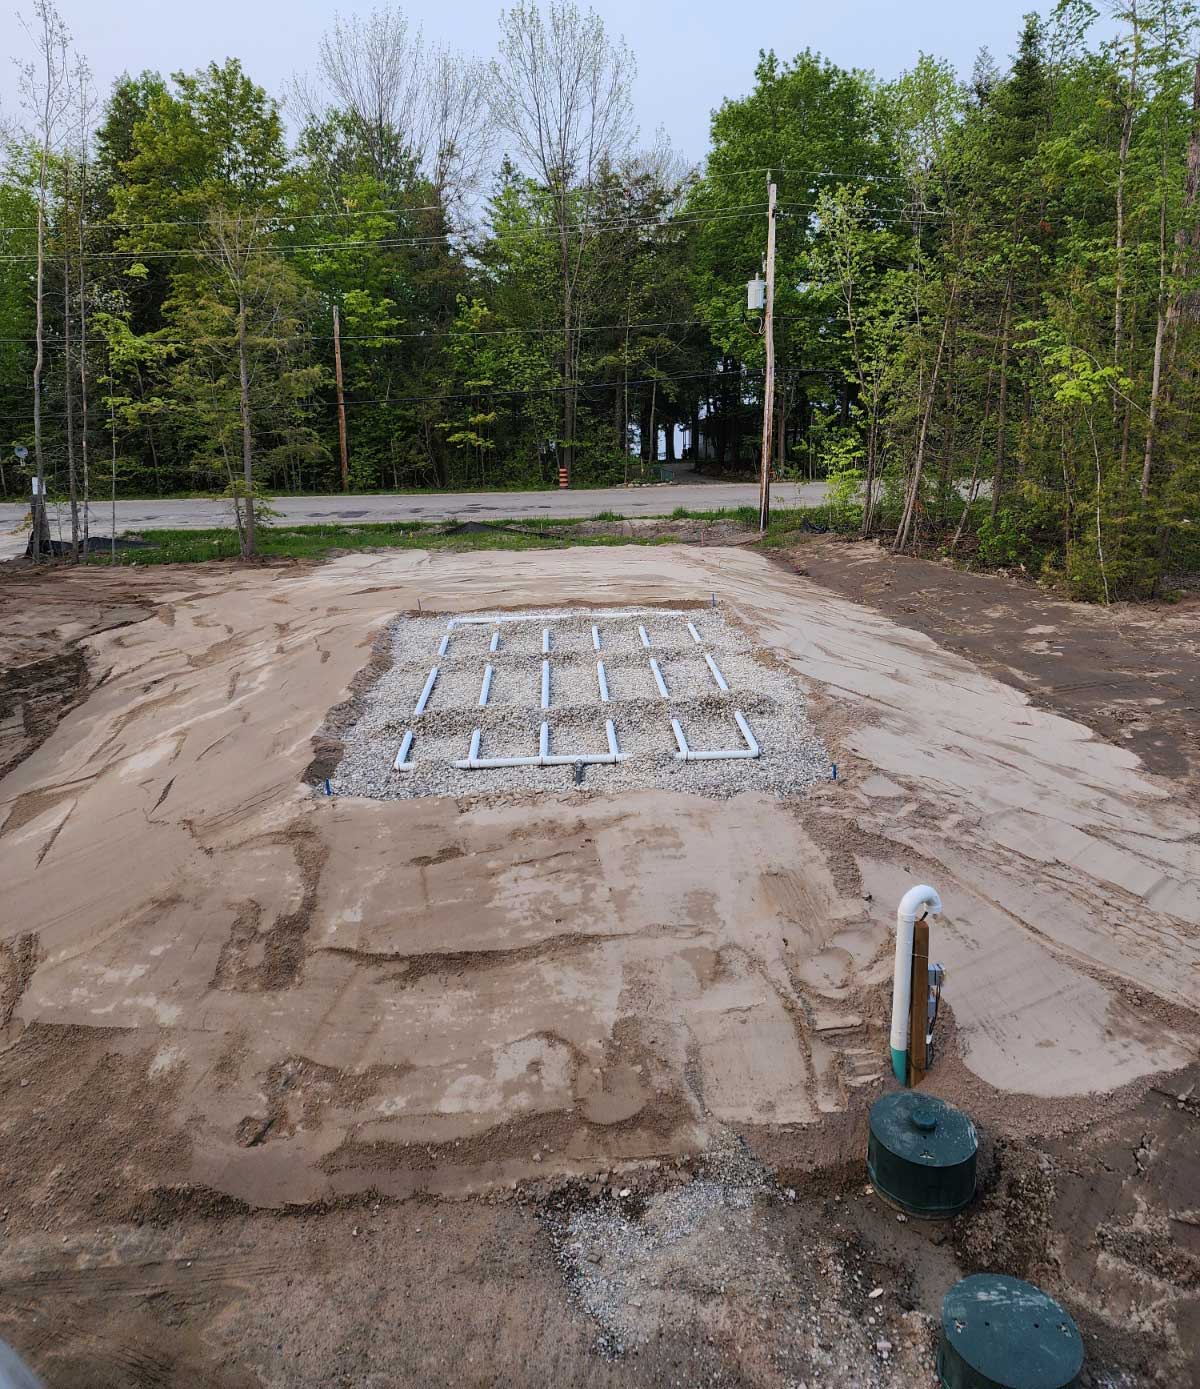 septic bed